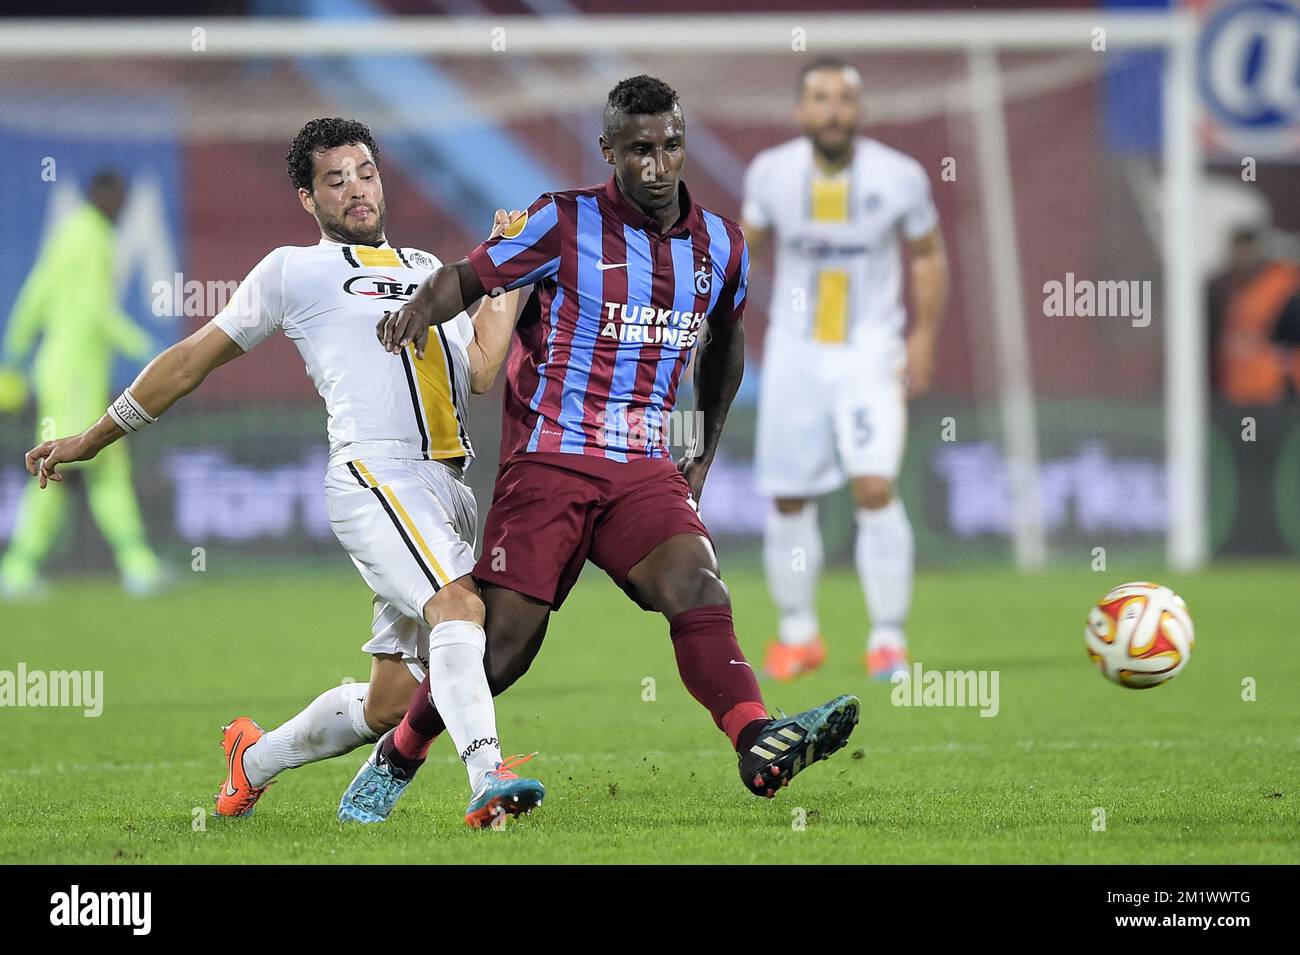 20141023 - TRABZON, TURKEY: Lokeren's Koen Persoons and Trabzonspor's Kevin Constant fight for the ball during a game between Turkish club Trabzonspor AS and Belgian soccer team KSC Lokeren OVL in the Huseyin Avni Aker Stadium in Trabzon, Thursday 23 October 2014. It is the third day of the group stage of the UEFA Europa League competition, in group L. BELGA PHOTO YORICK JANSENS Stock Photo